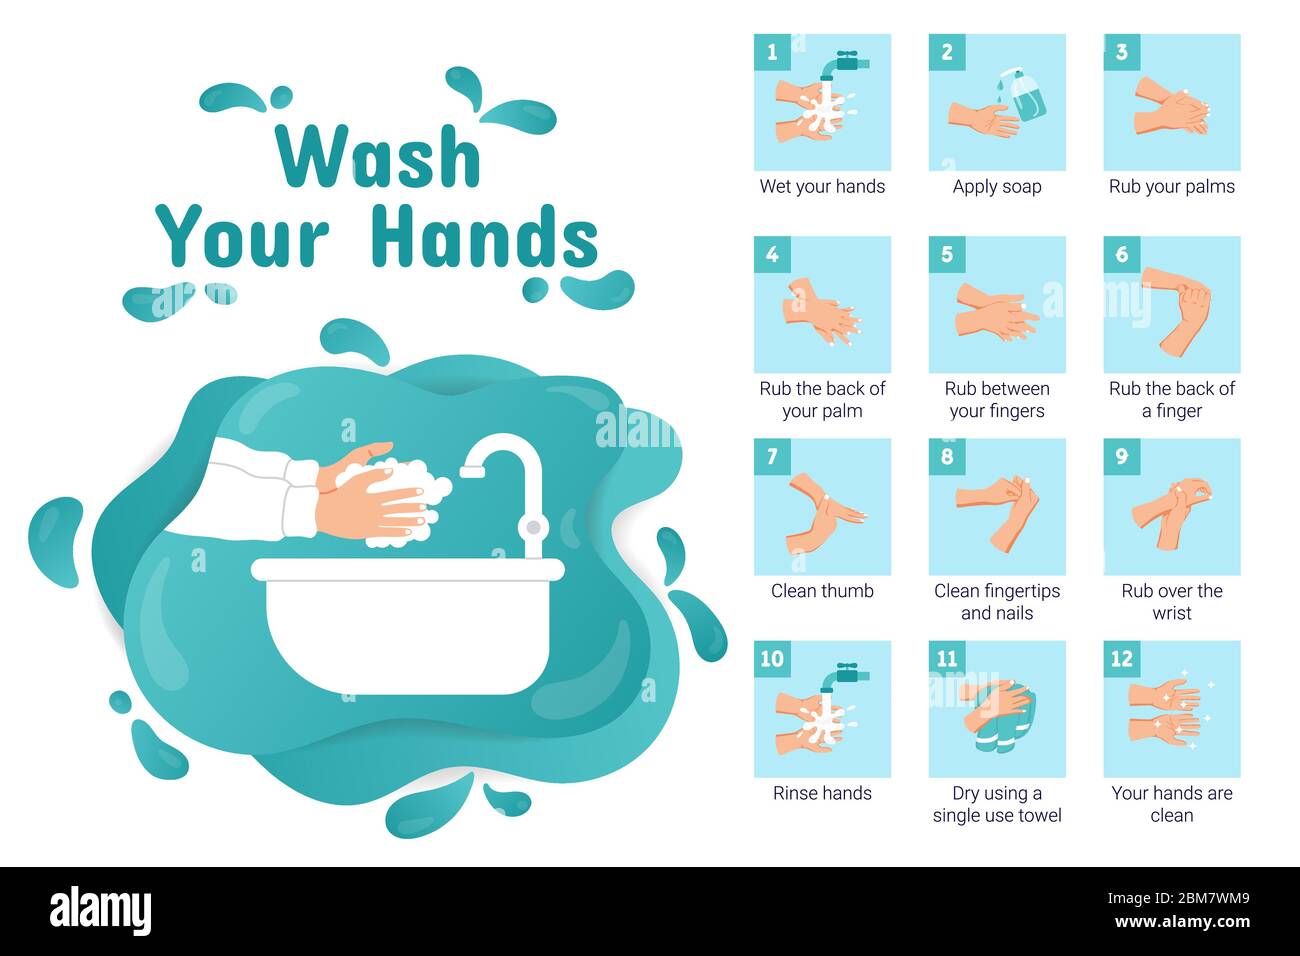 Wash your hands. How to wash your hands properly. Steps to hands washing for prevent illness and hygiene. Step by step infographic illustration. Stock Vector